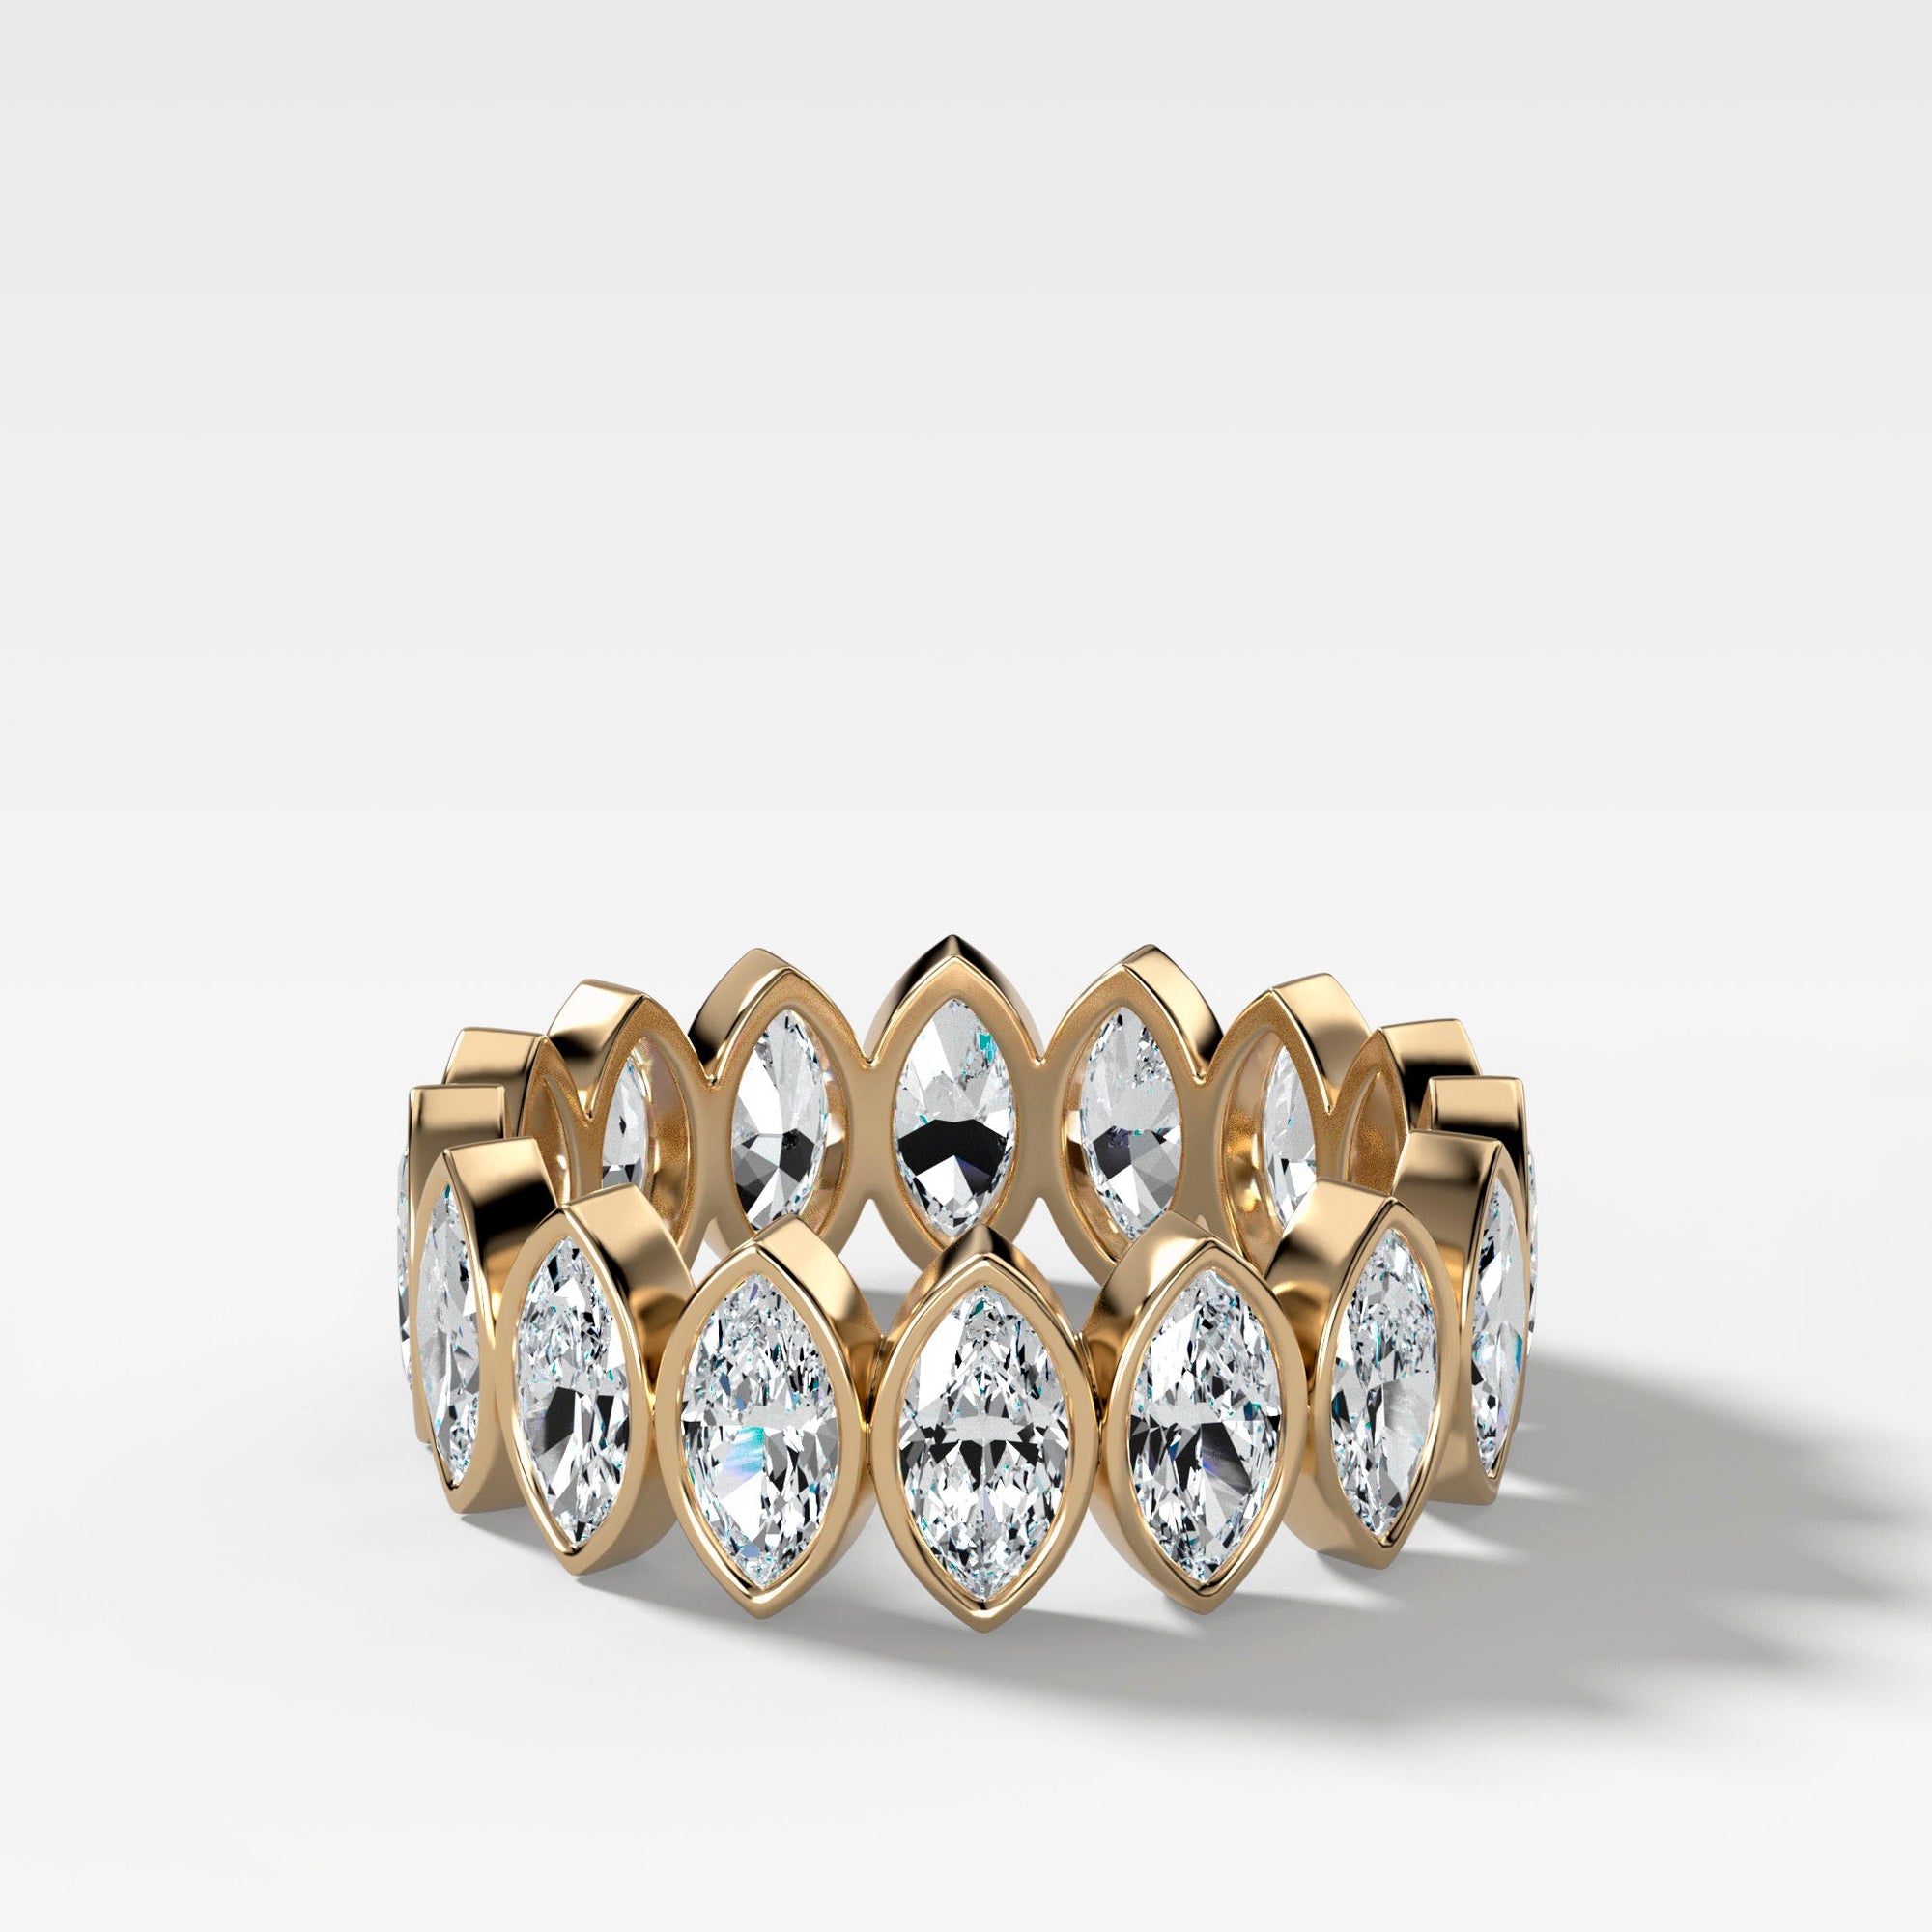 Midi Bezel Set Eternity Band With Marquise Cuts in Yellow Gold by Good Stone